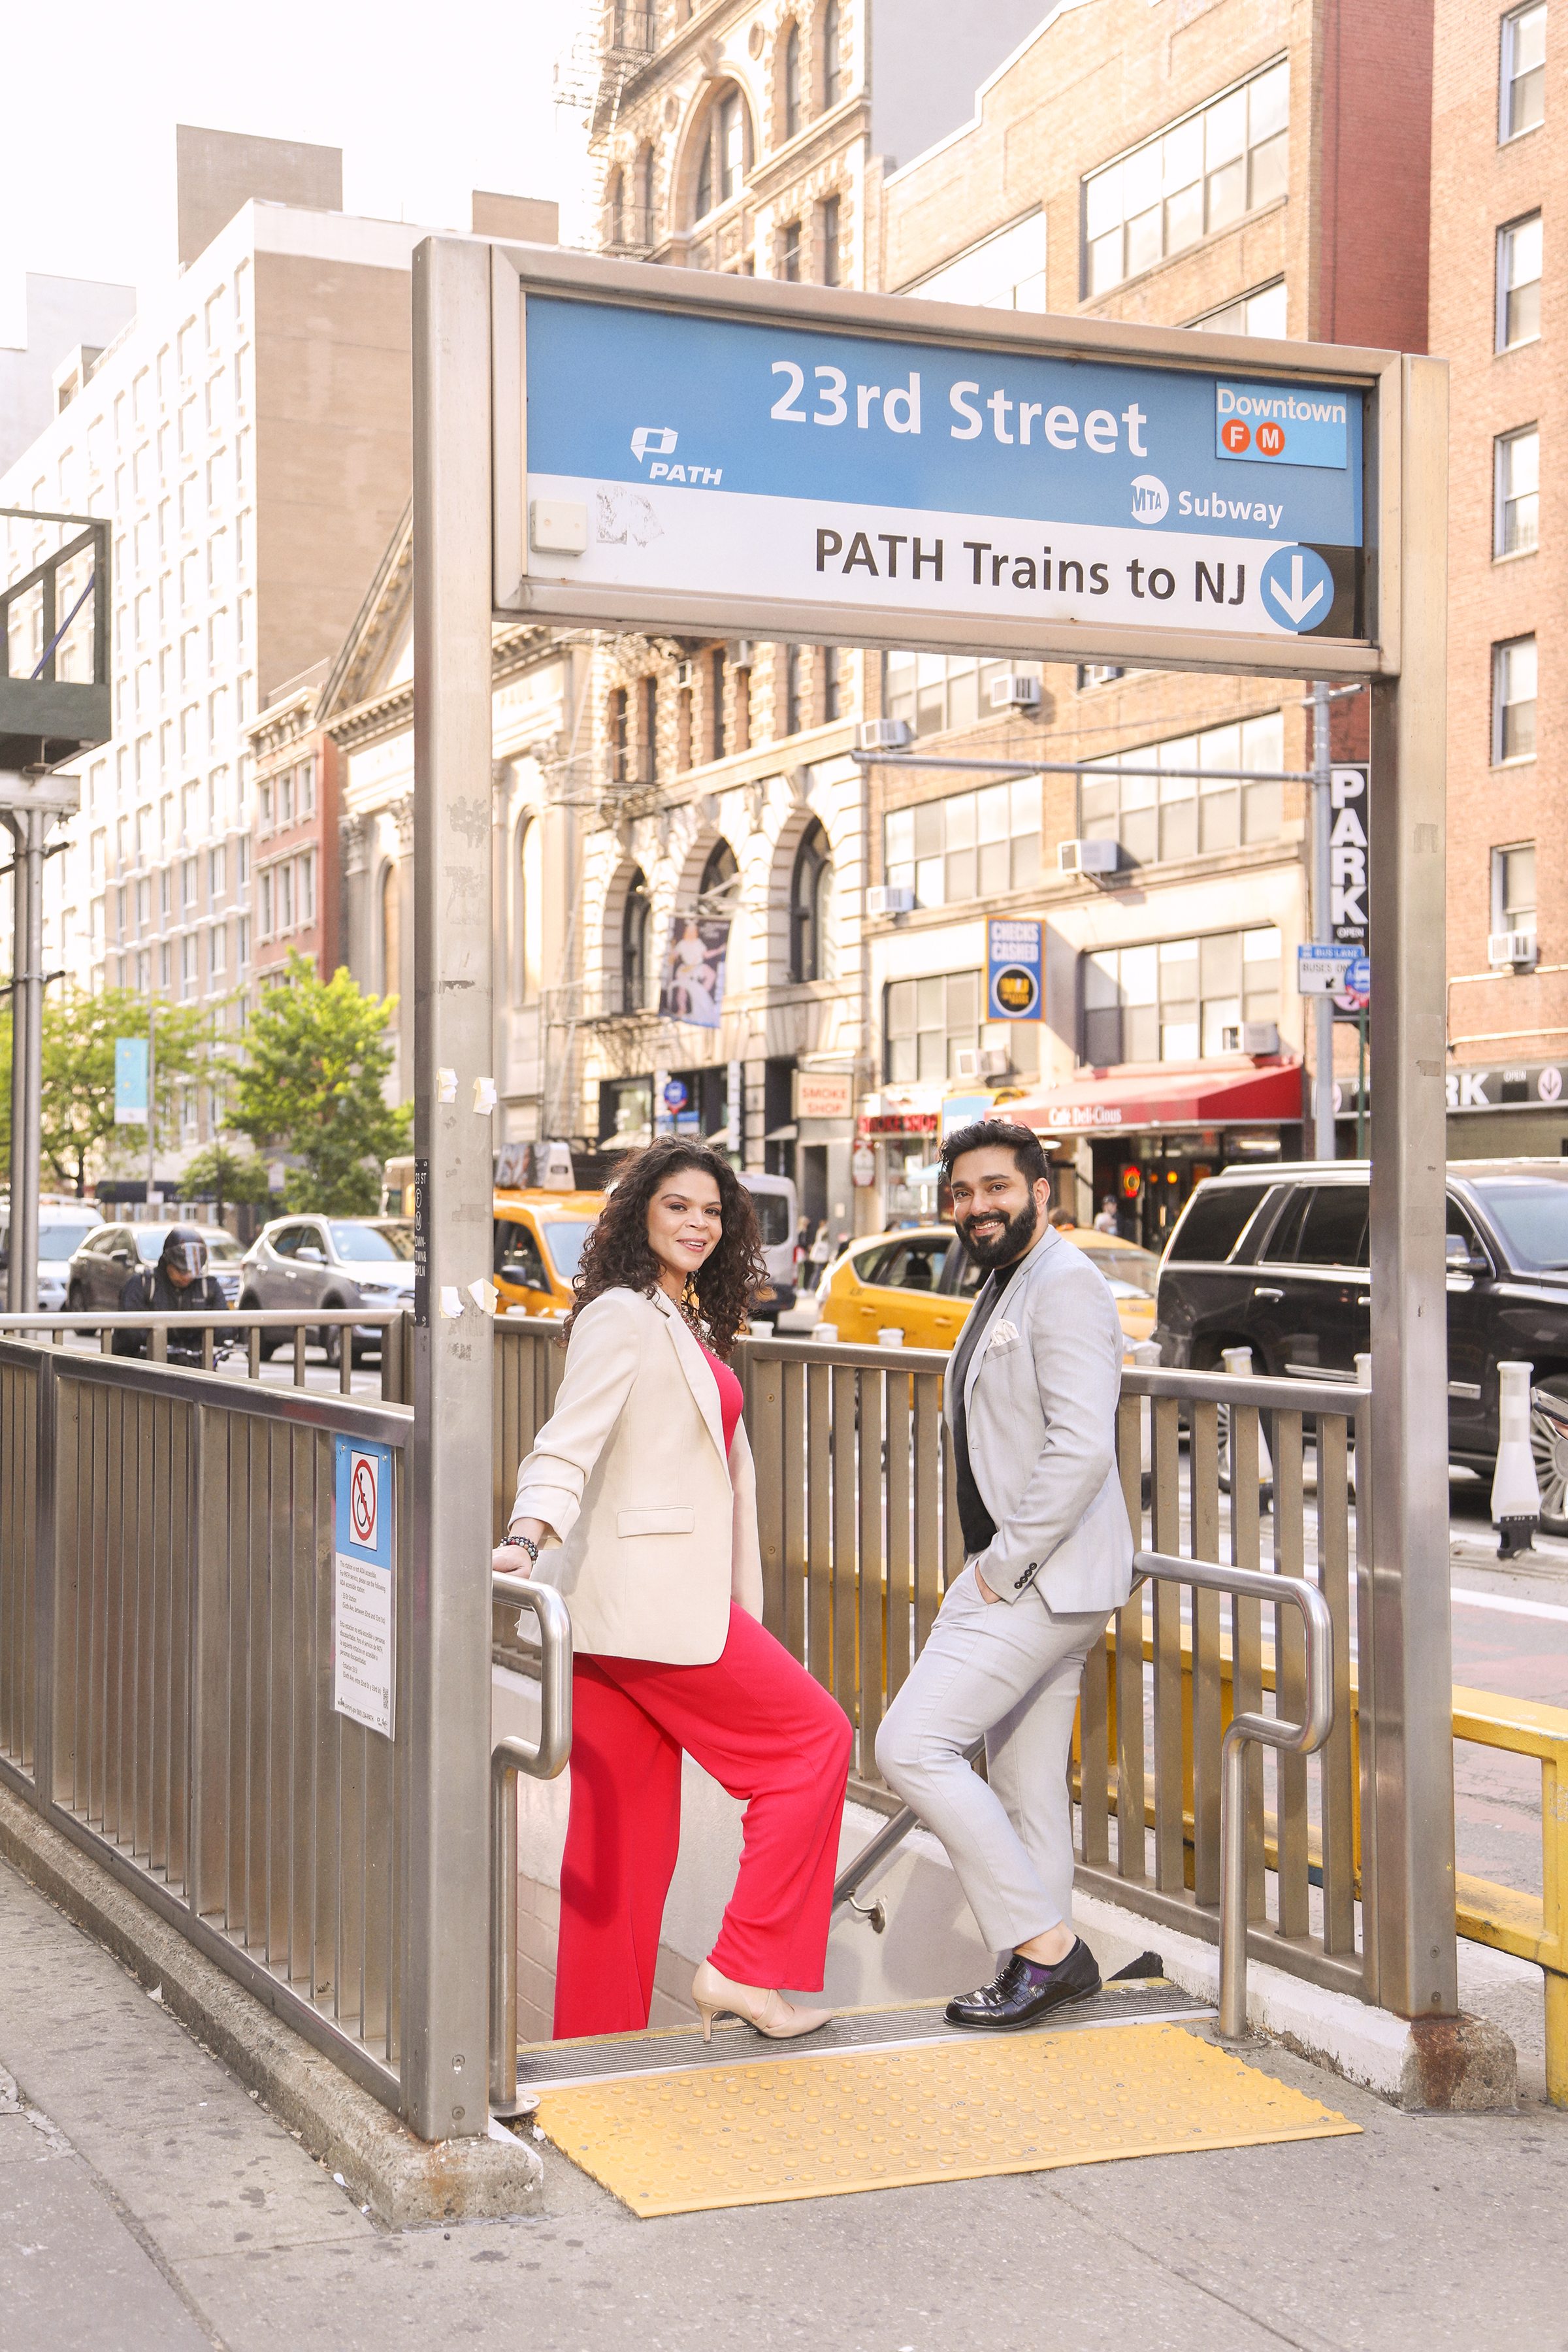 A text banner promoting trains to New Jersey on 23rd Street